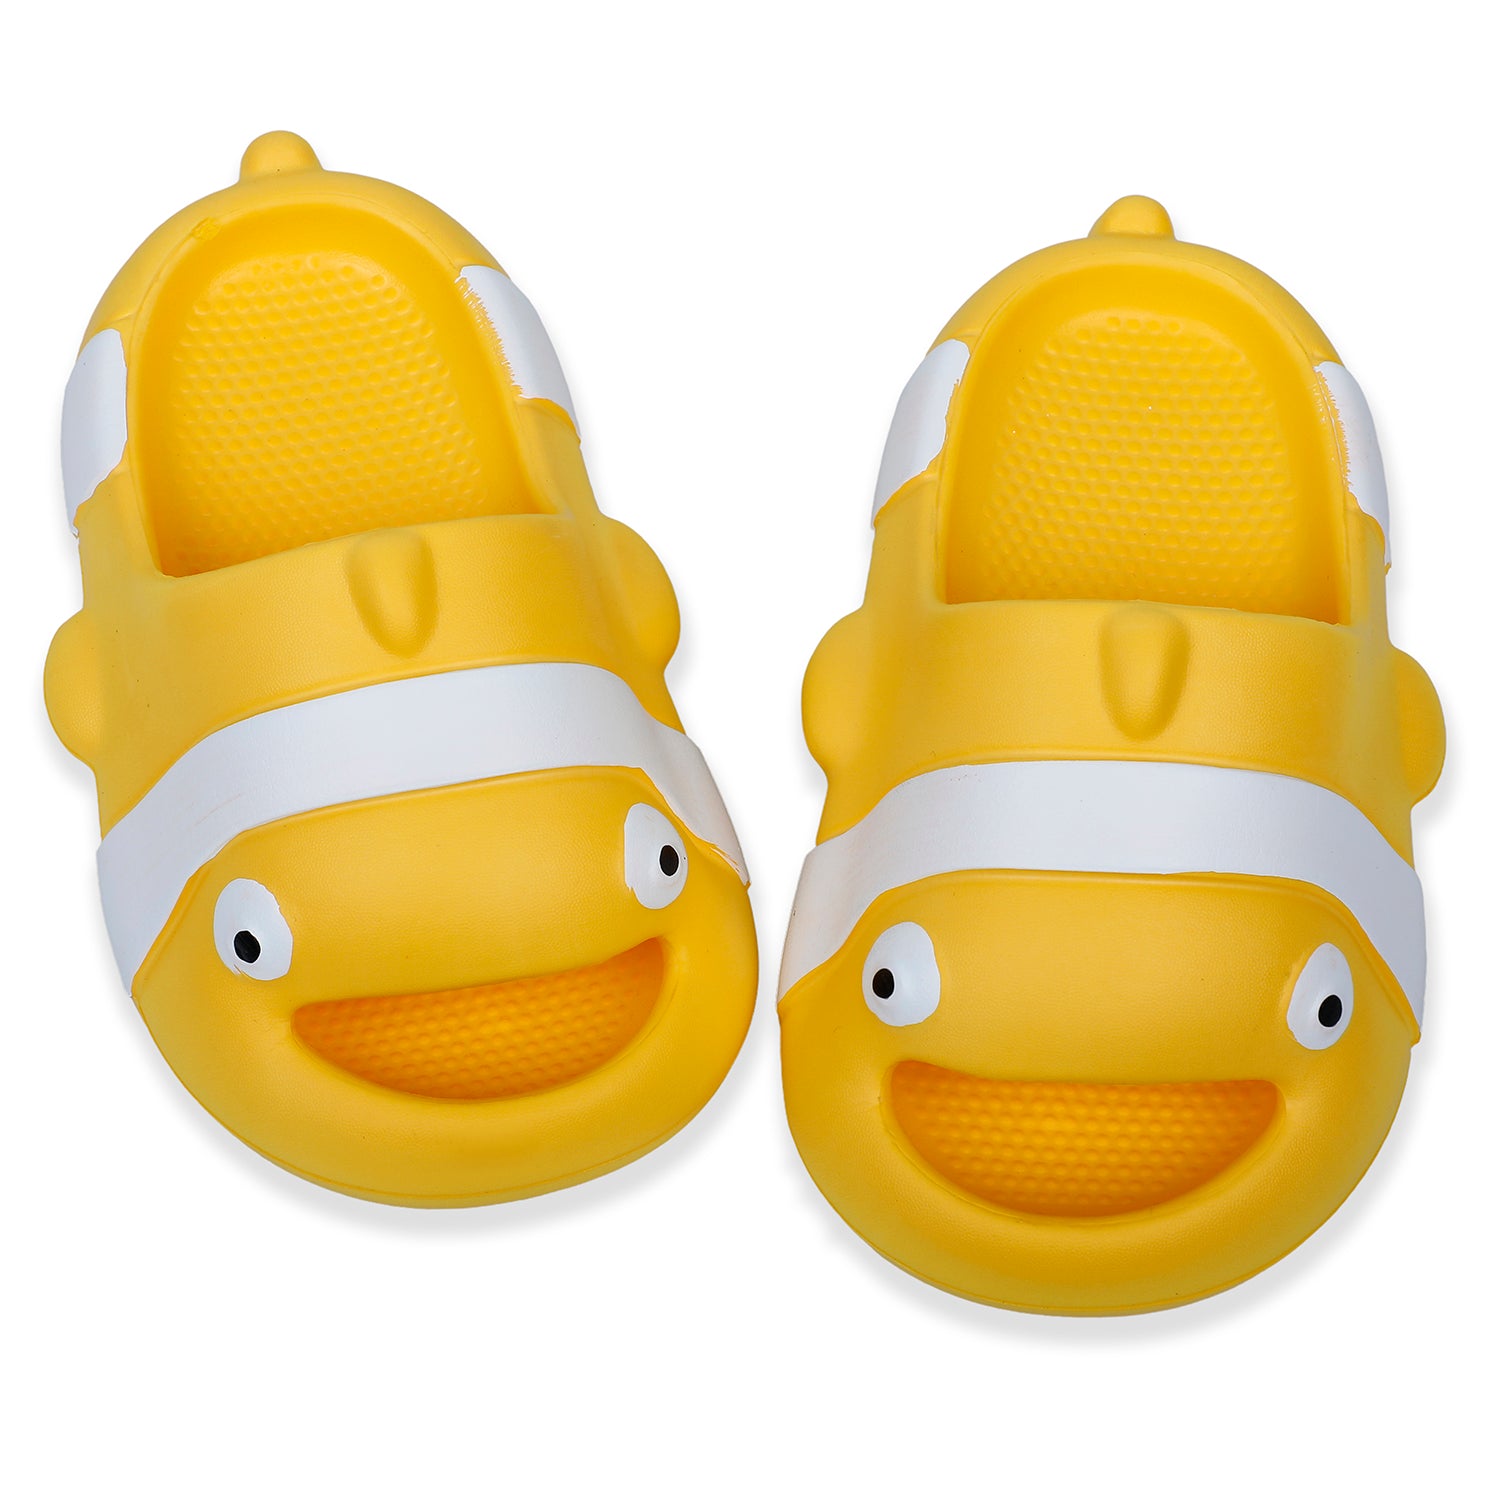 Shop Yellow Nemo Sliders for Kids Online at Baby Moo